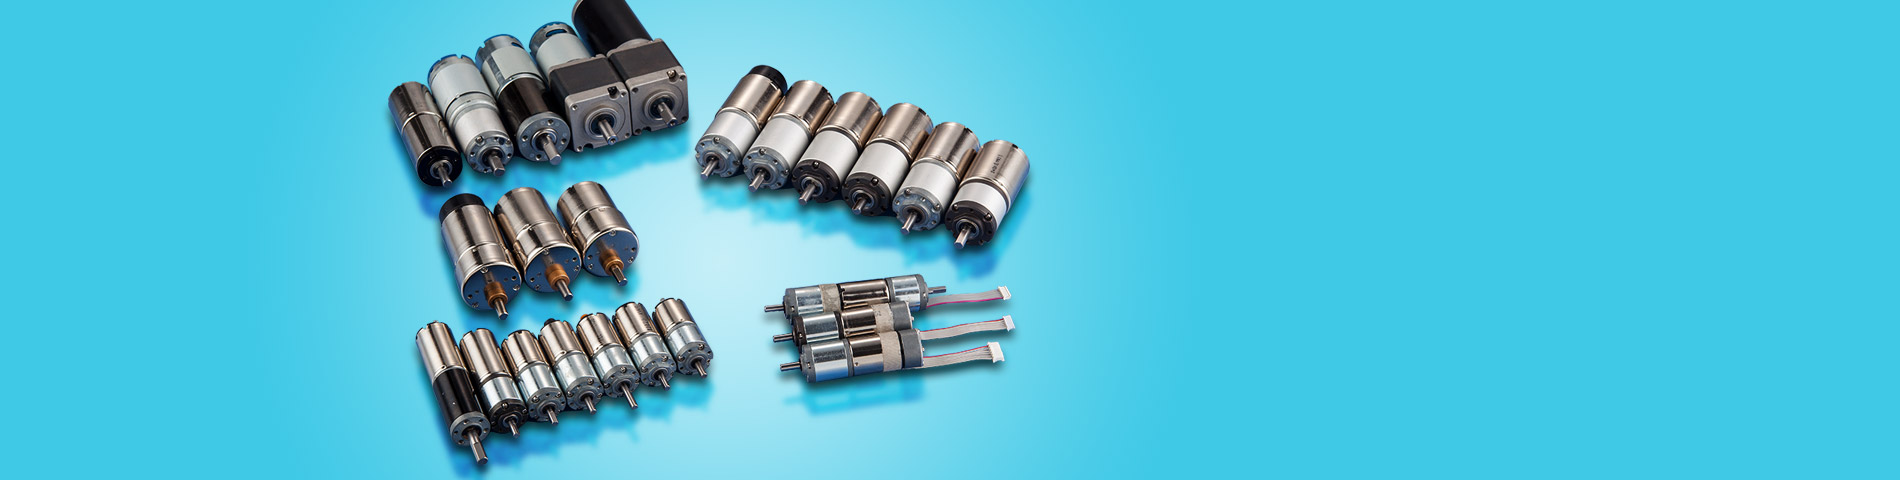 Develop & Manufacture  Miniature and Small DC Gear Motors